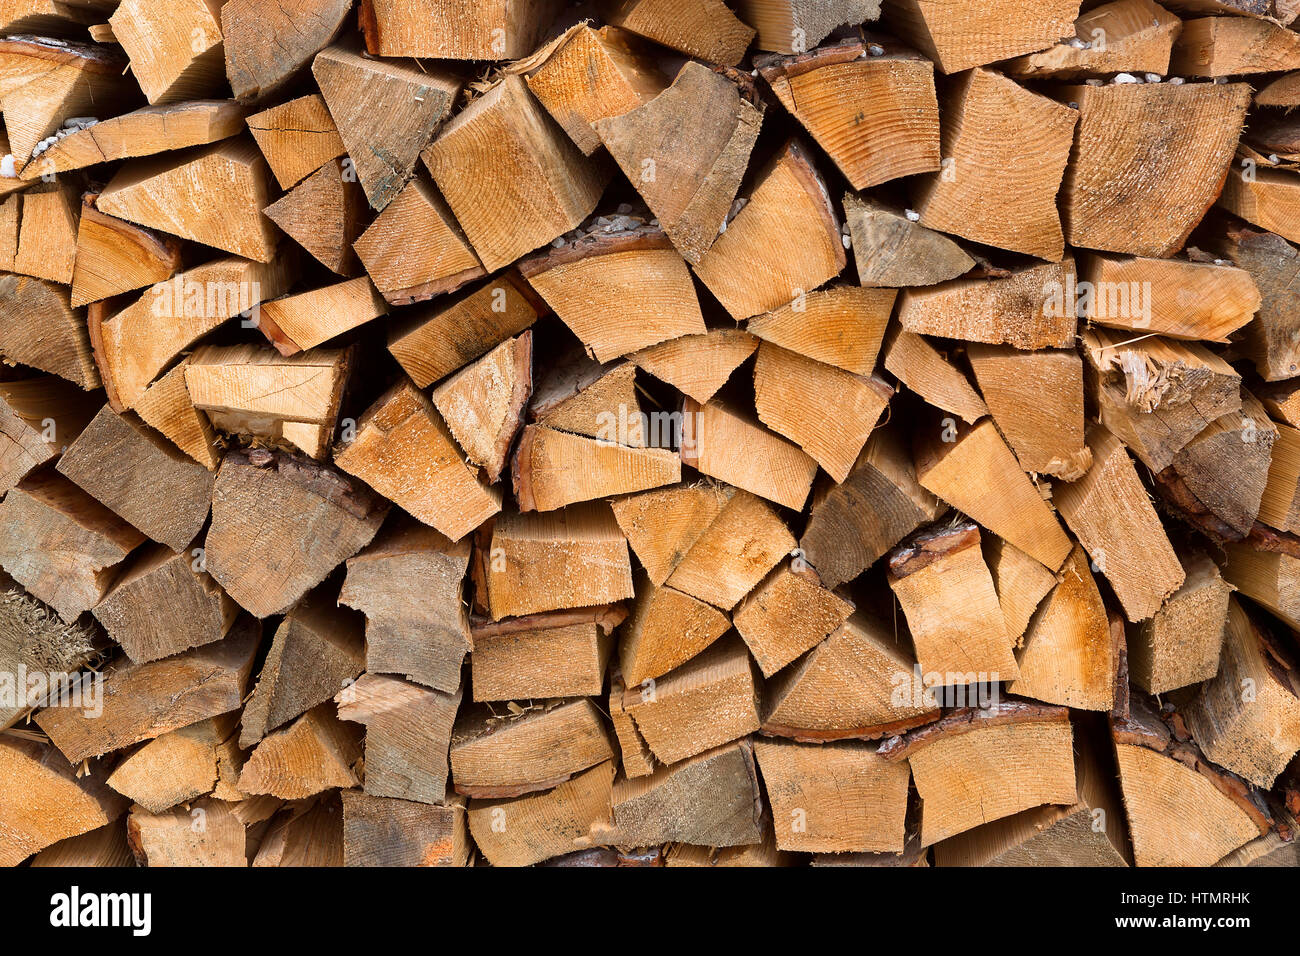 Wooden stacks for firewood Stock Photo